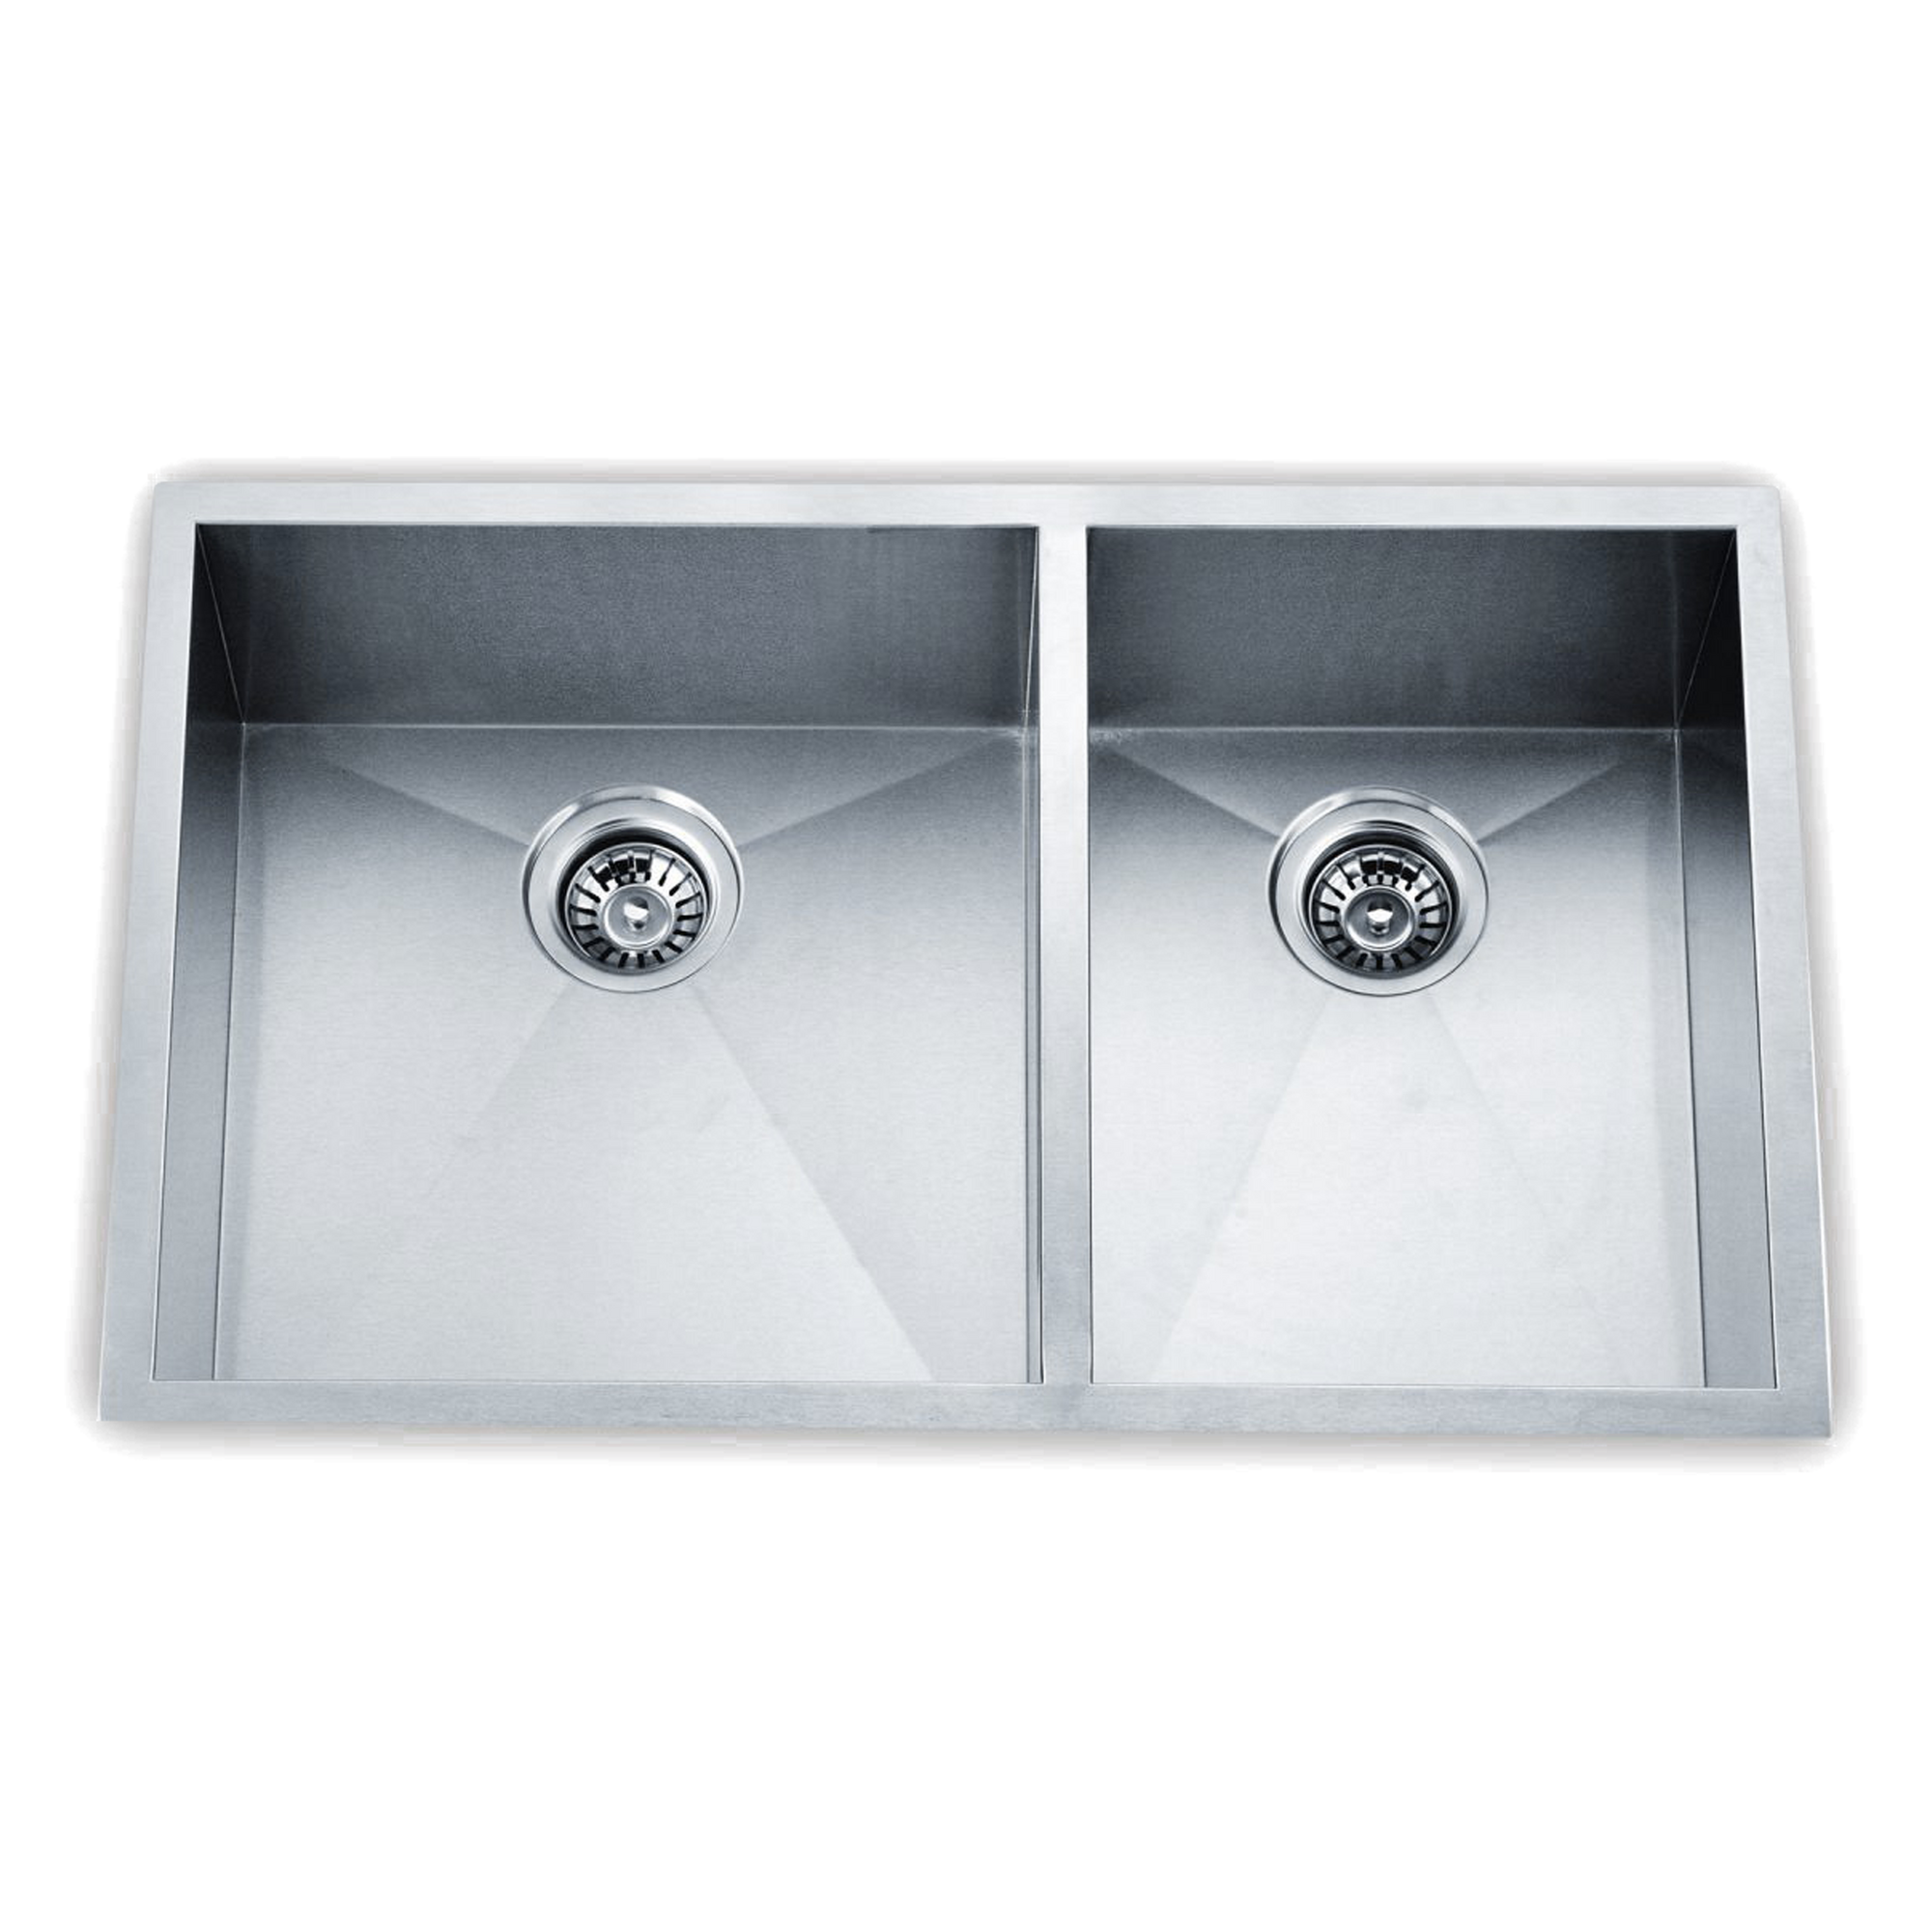 A seamless, contemporary, stainless steel double kitchen sink for under mount application.